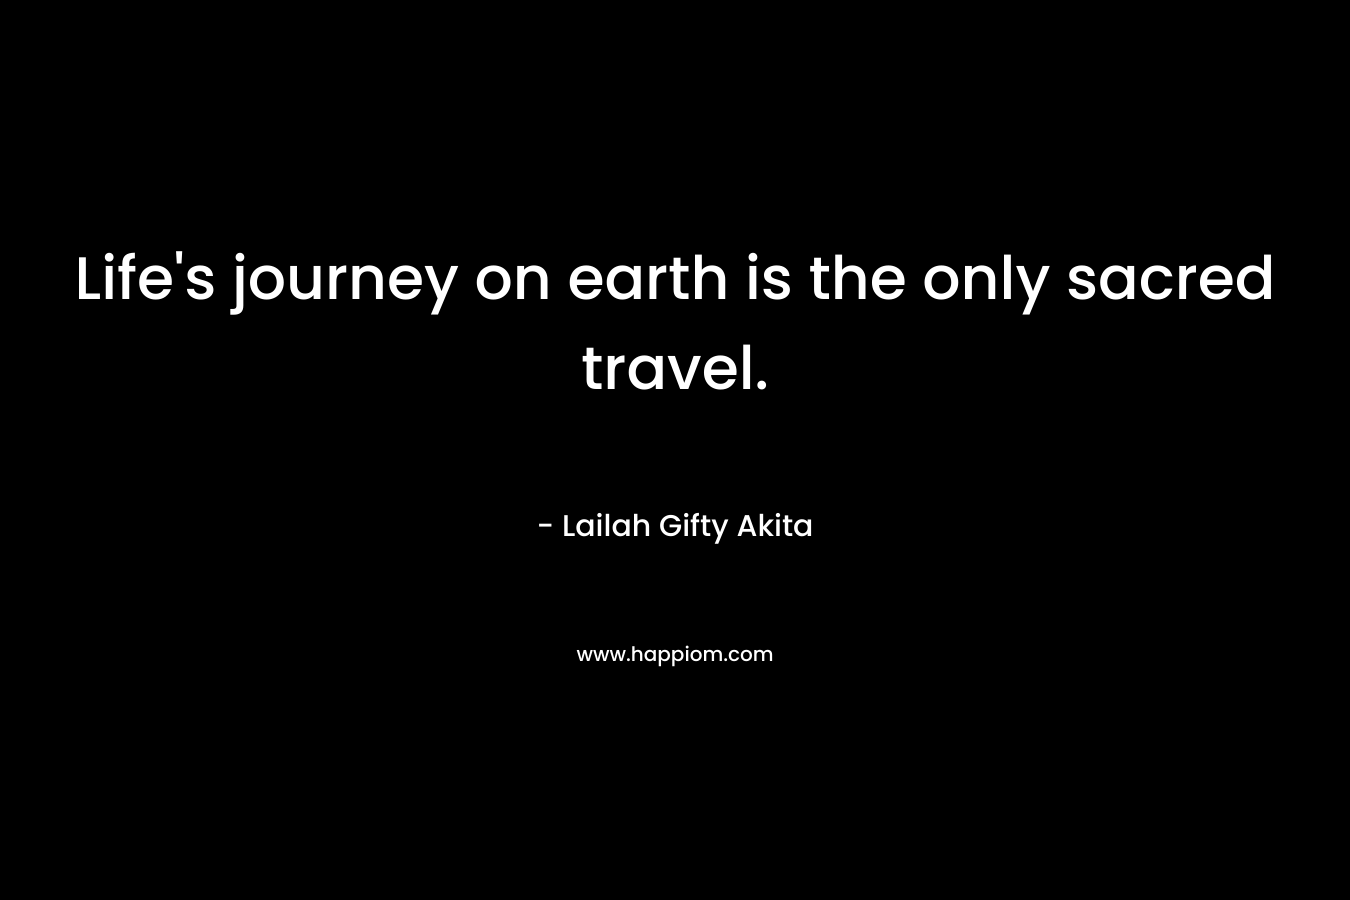 Life's journey on earth is the only sacred travel.